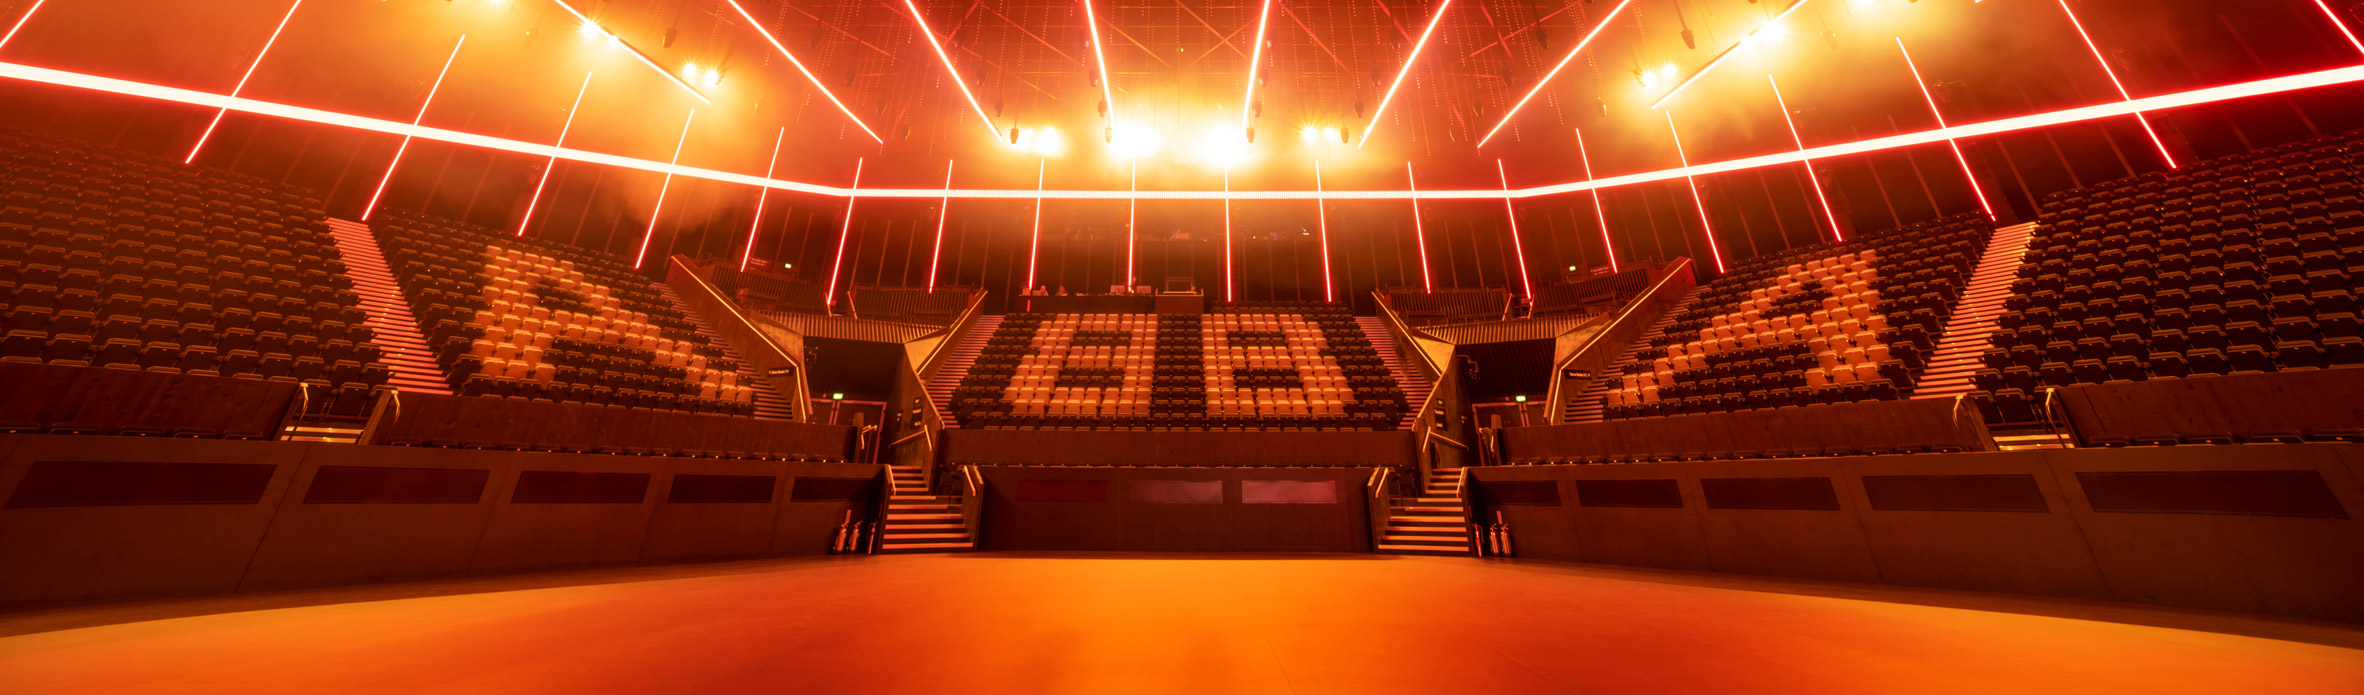 Interior image of ABBA branded audience seating at the venue